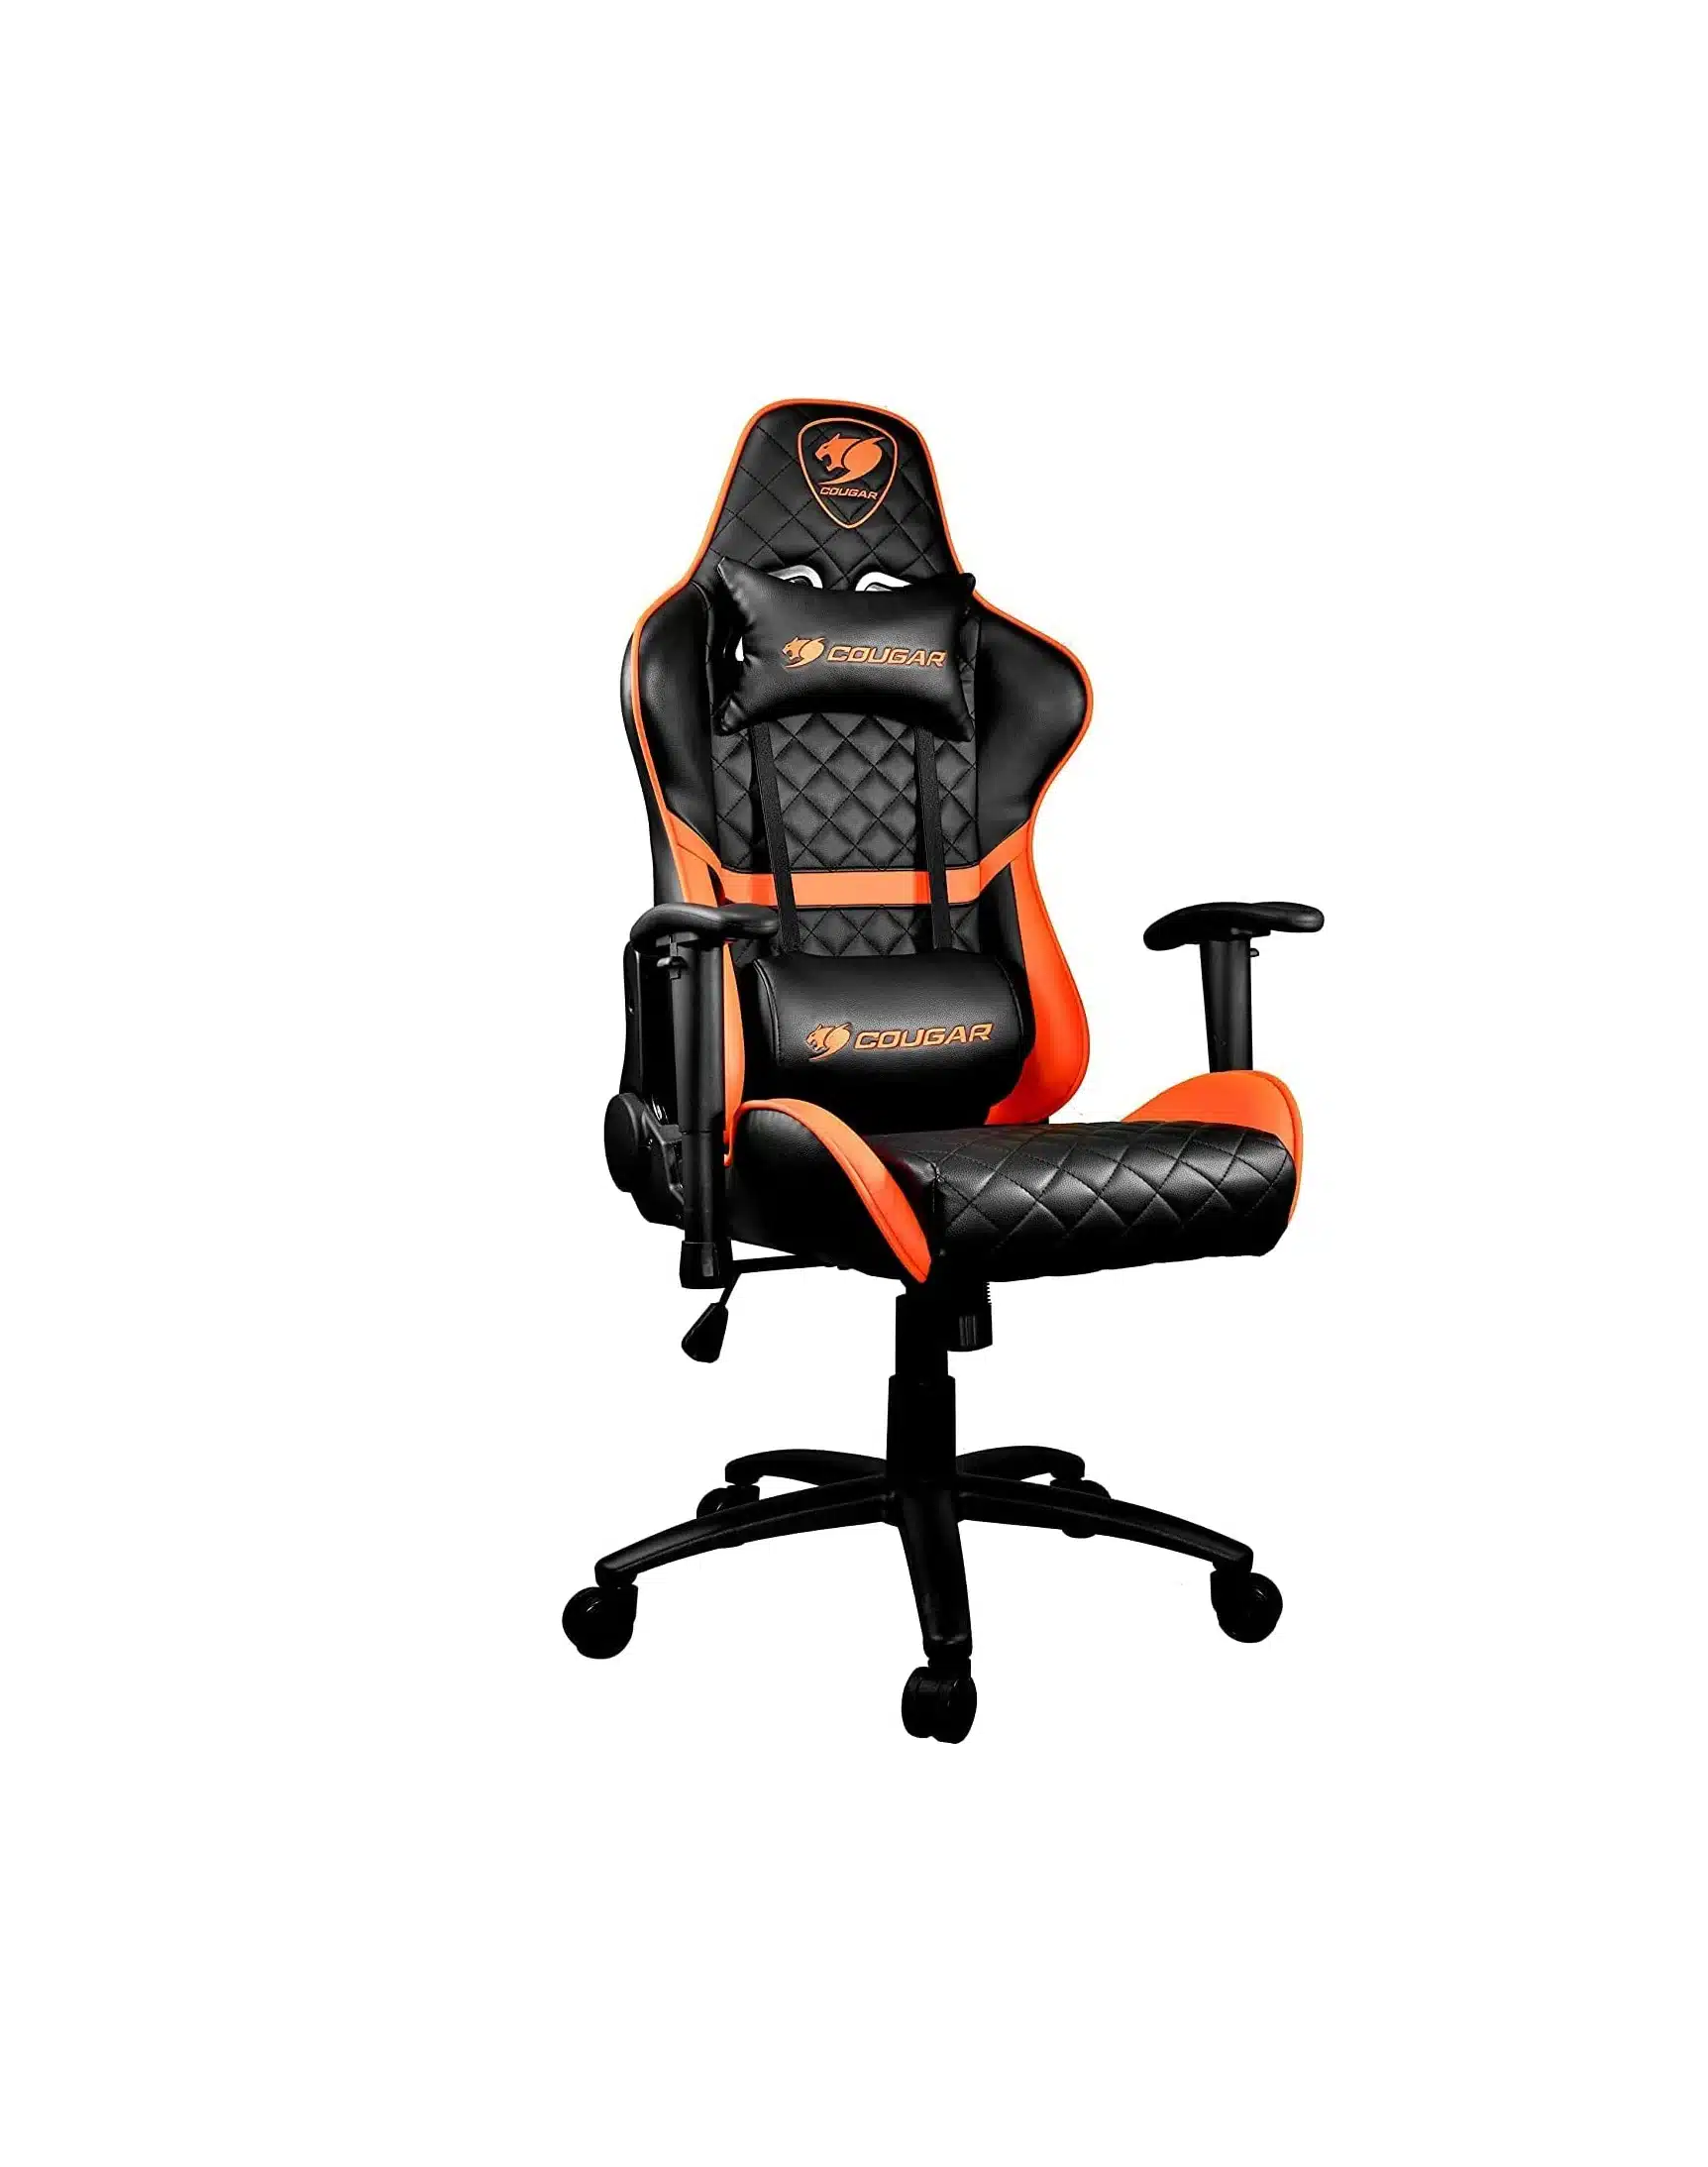 Cougar Armor One Gaming Chair With Reclining (Orange) |  Accessories |  Gaming chair